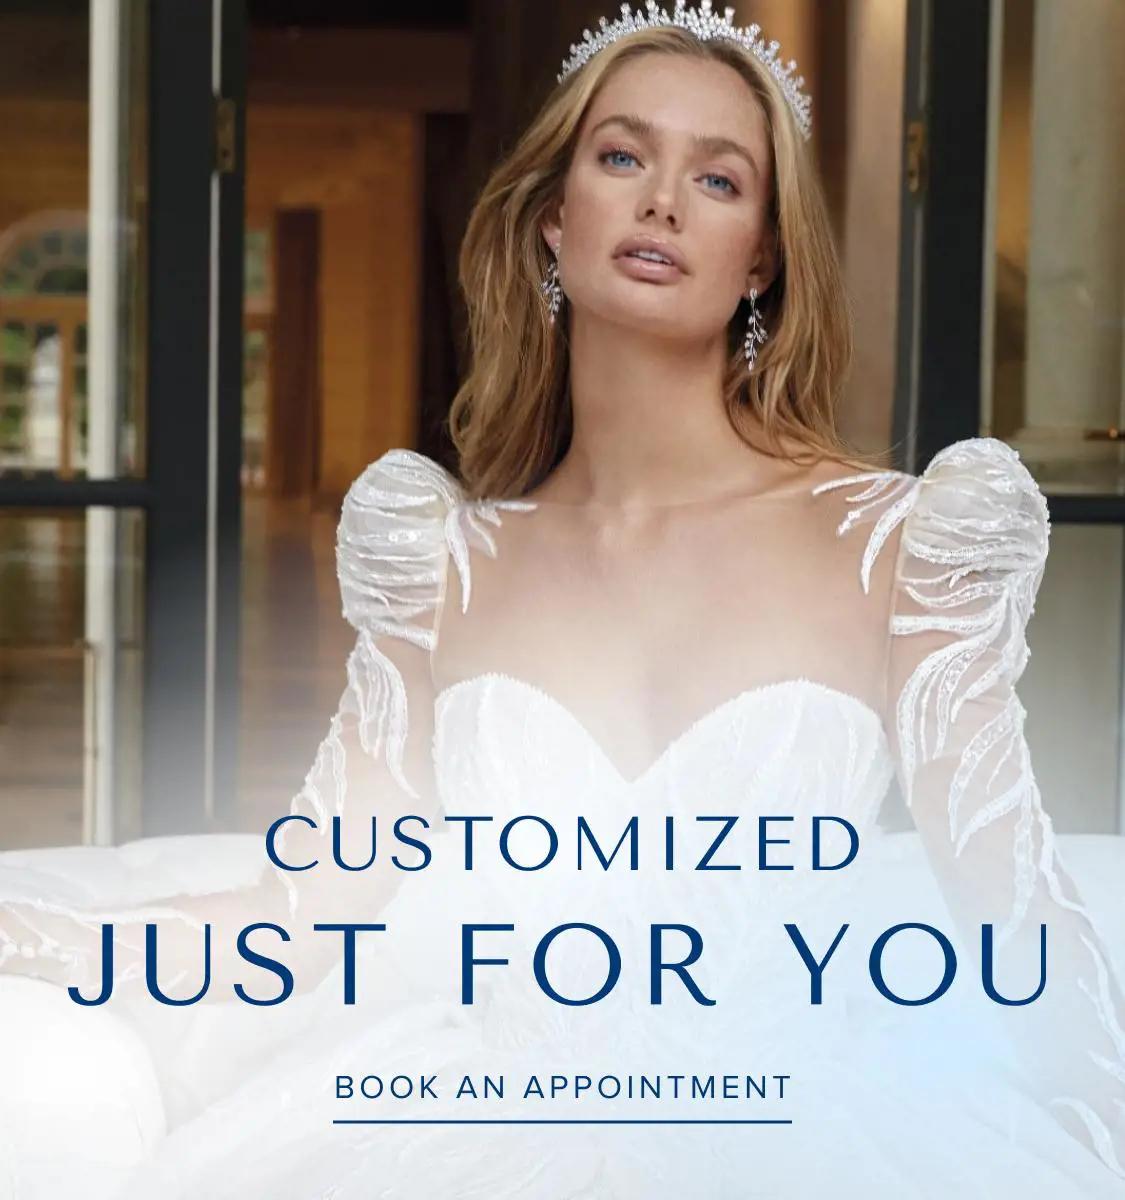 Banner promoting customized gowns